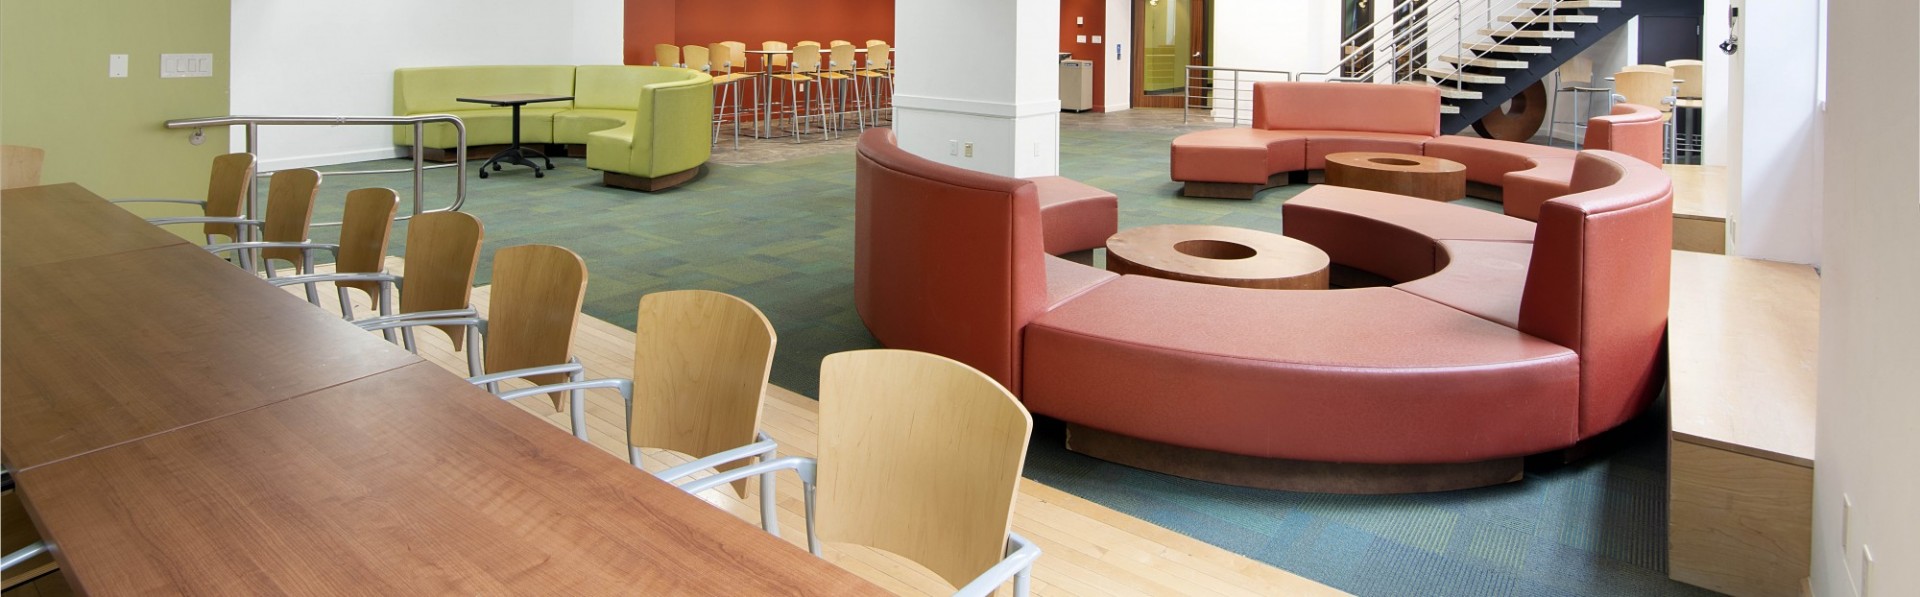 An empty residential building lounge with circular red and green couches and long wooden tables with wooden chairs.